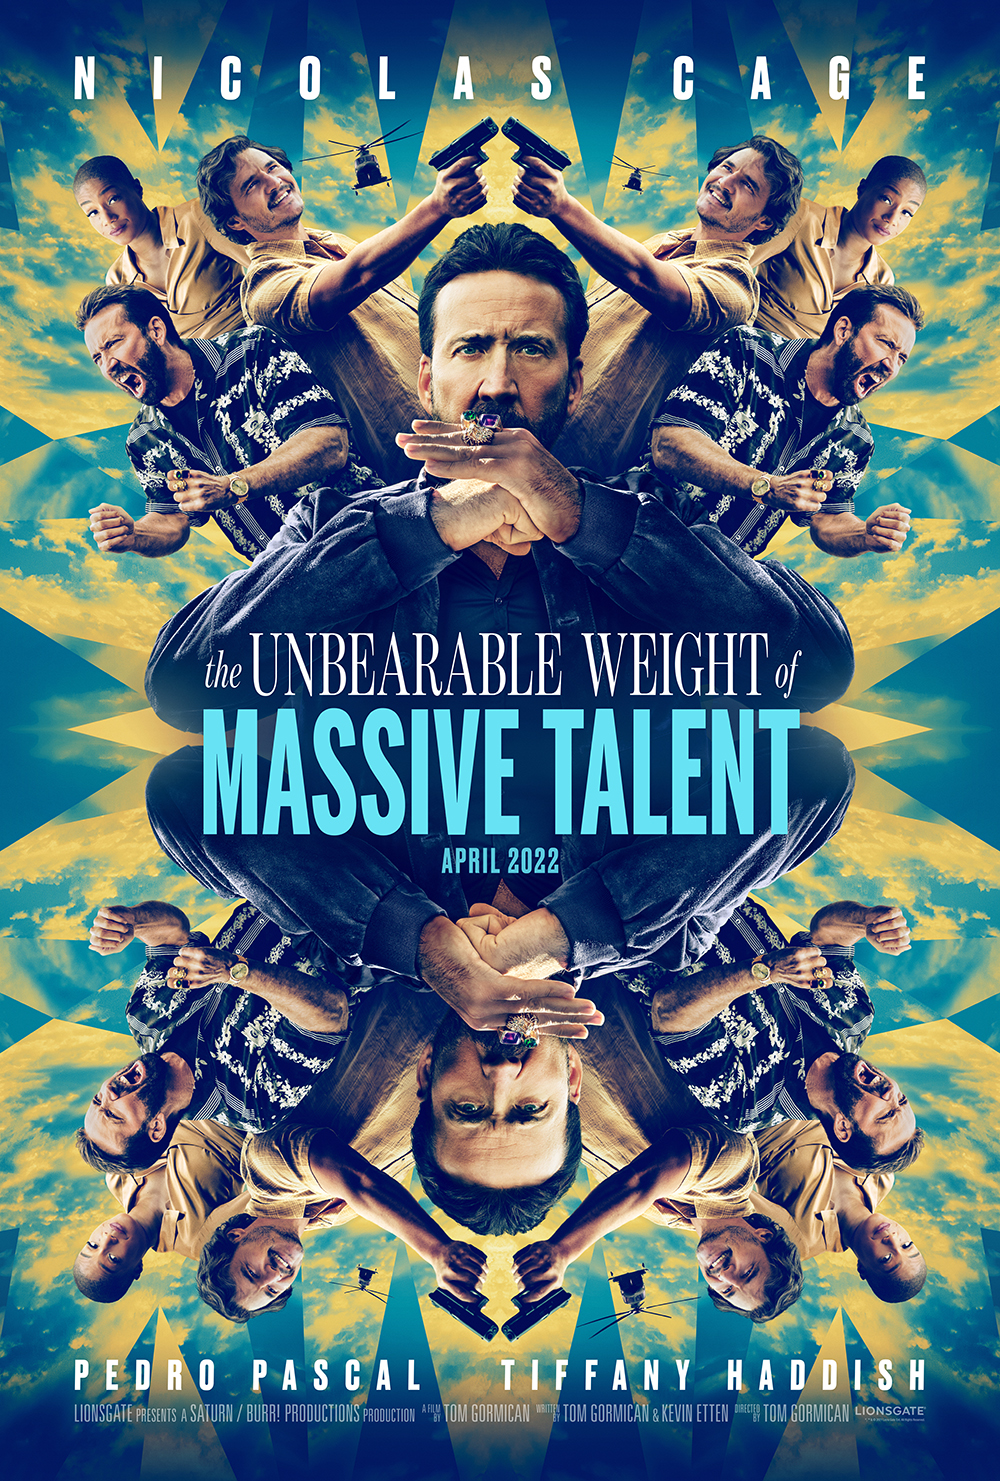 Nouvelle - The Unbearable Weight of Massive Talent : Discover the official  interviews